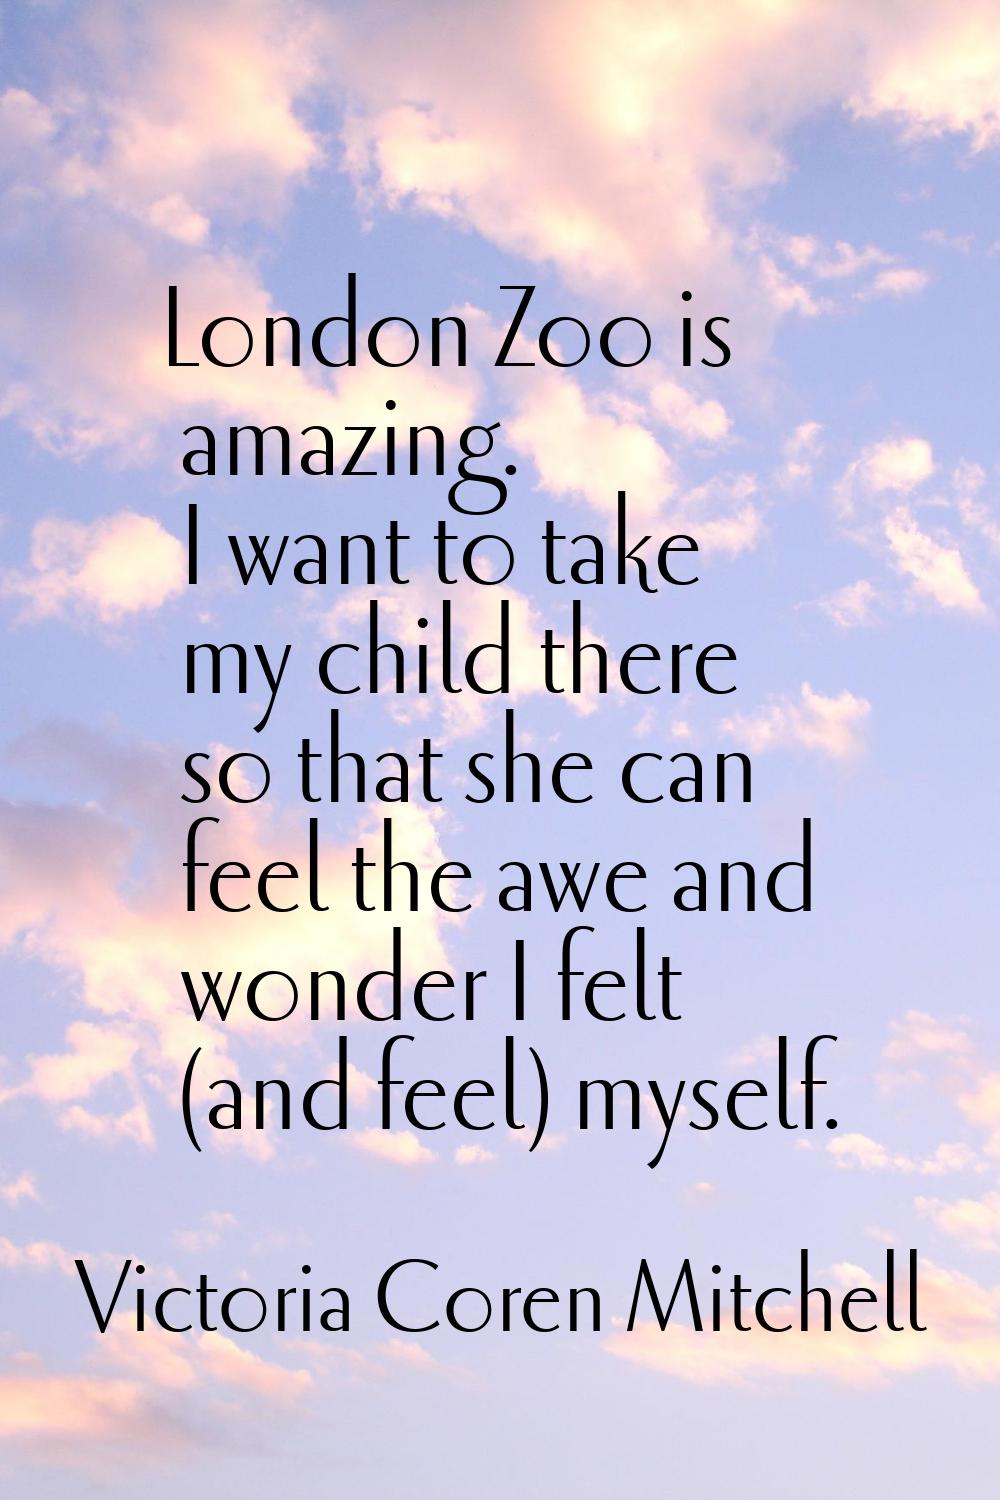 London Zoo is amazing. I want to take my child there so that she can feel the awe and wonder I felt